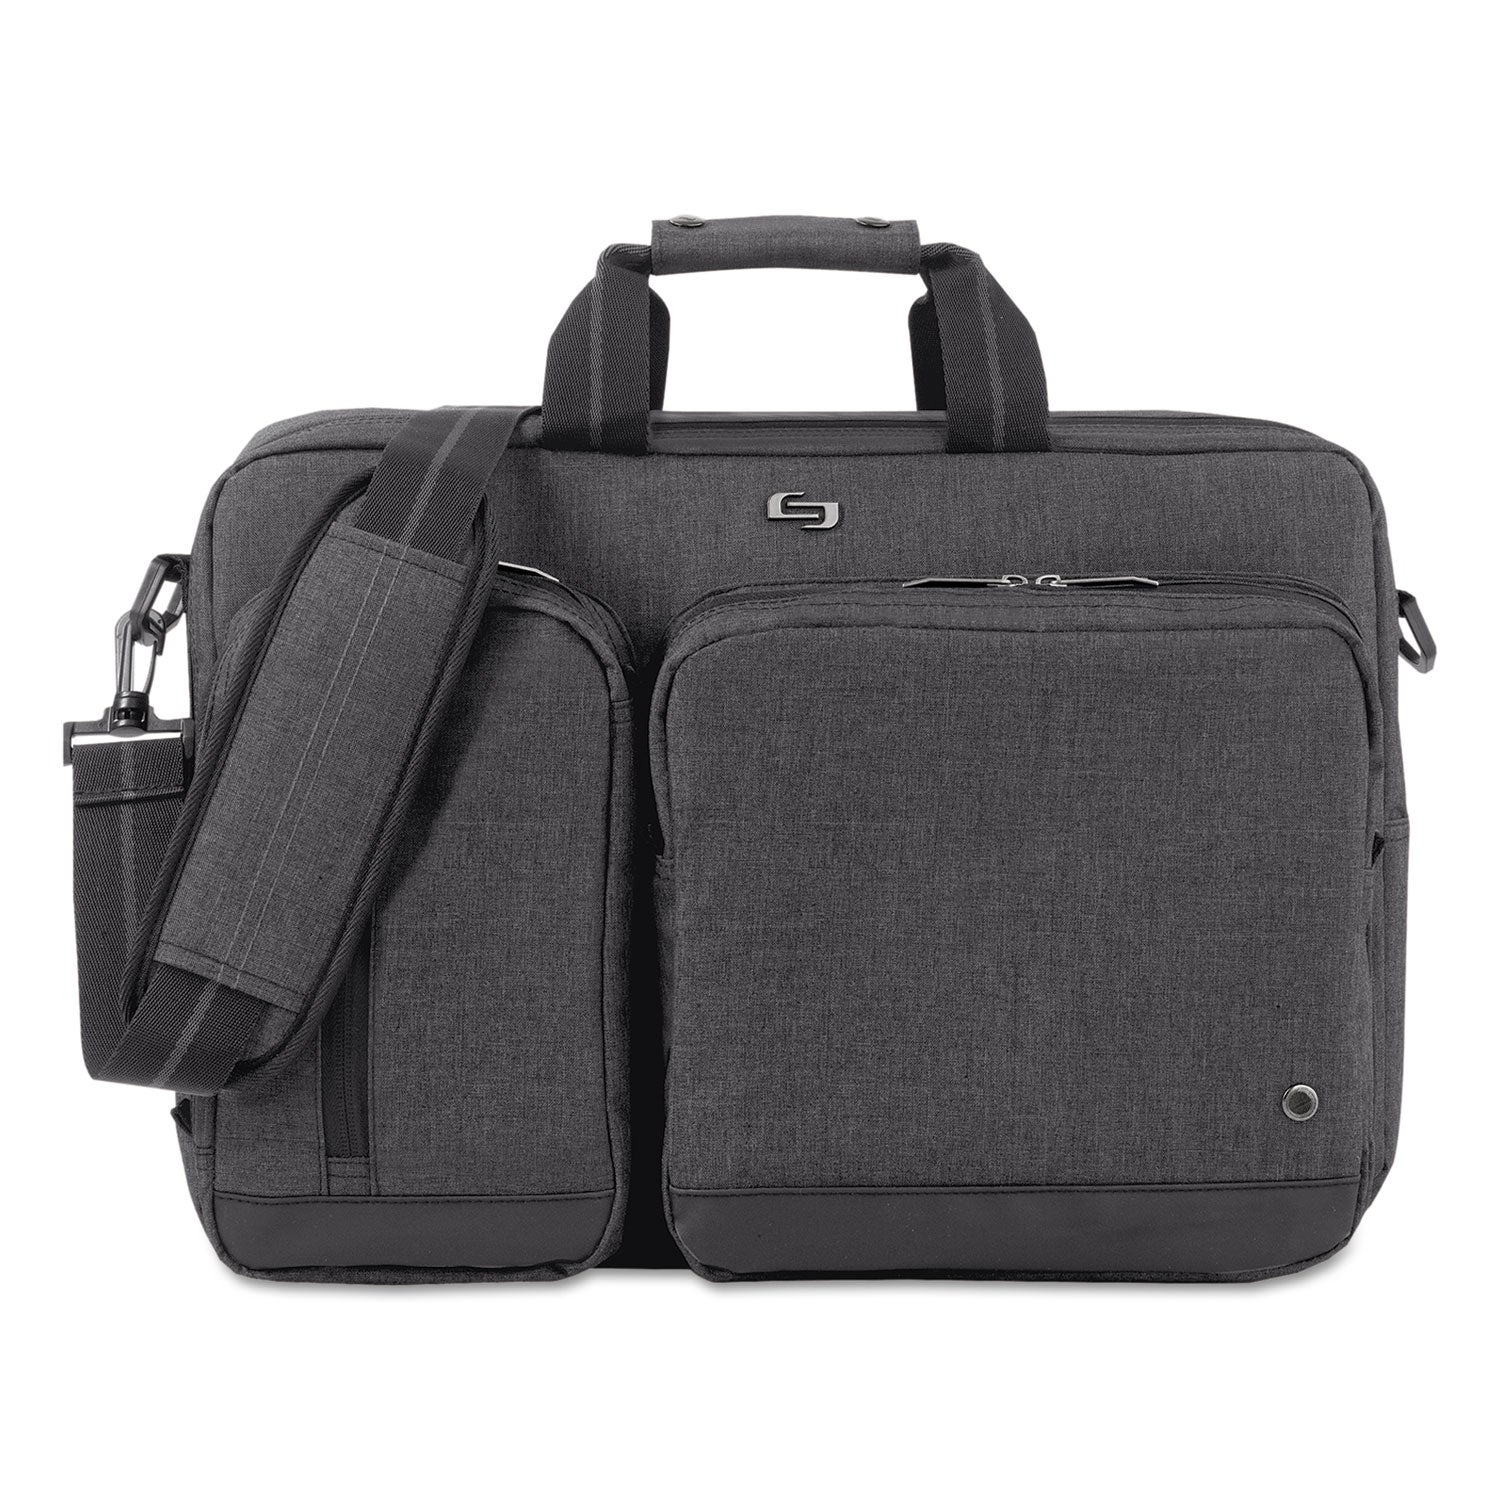 urban-hybrid-briefcase-fits-devices-up-to-156-polyester-1675-x-4-x-12-gray_uslubn31010 - 1